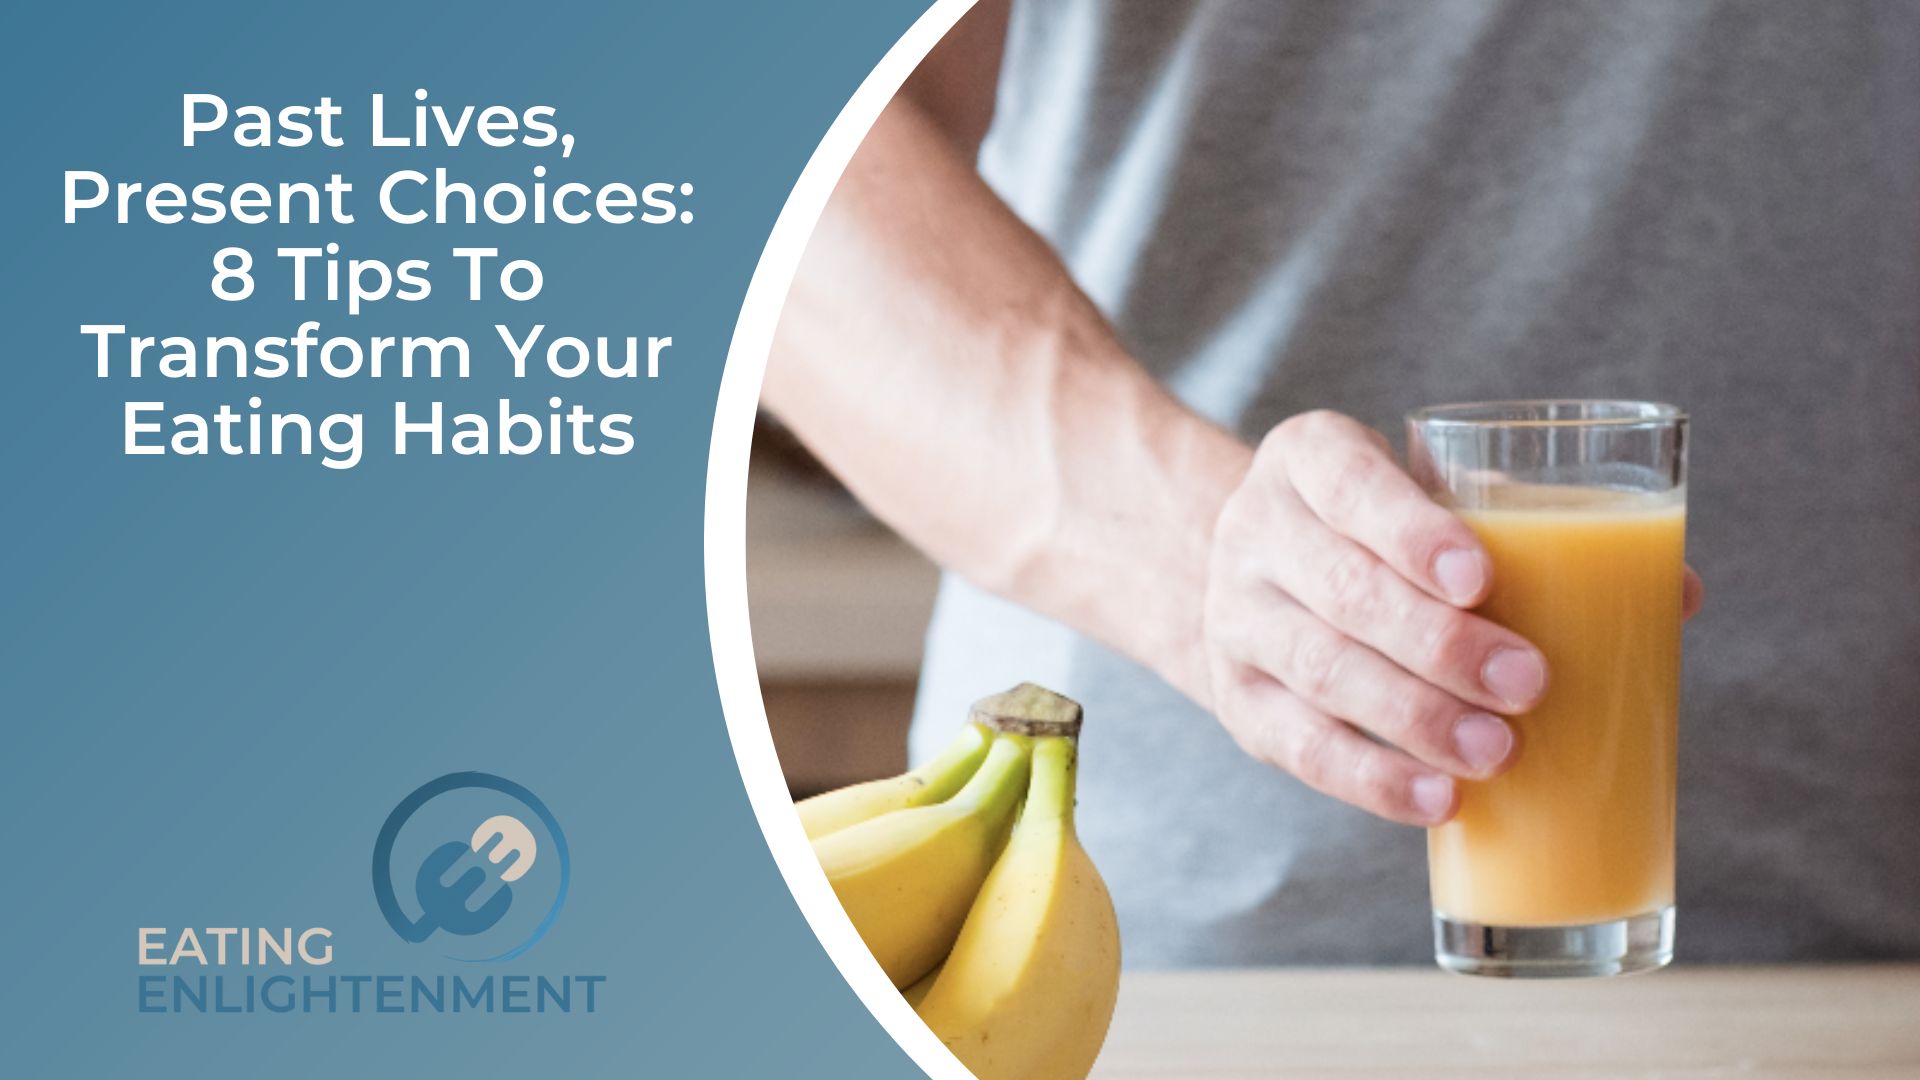 Past Lives, Present Choices 8 Tips To Transform Your Eating Habits